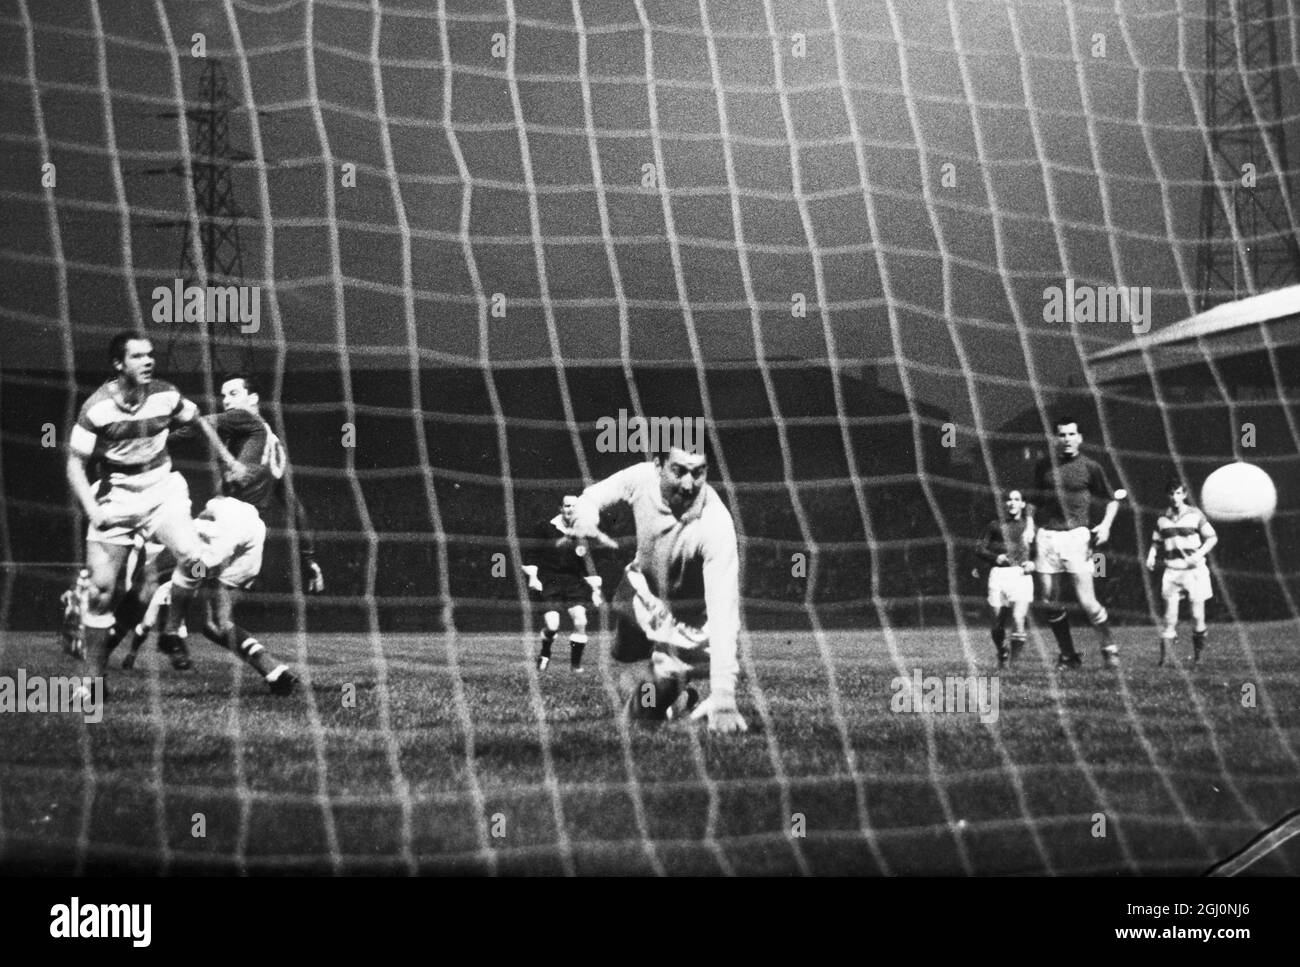 Parkhead , Glasgow ; This shot by Celtic ' s Chalmers ( No 10 ) on the left , shoots past Hamilton goal - keeper Lamont to register Celtic ' s first goal in the first leg of the Scottish League Cup , quarter - final match at Parkhead . The goal was the fore - runner of ten . The match ended in a 10 - 0 victory for Celtic . 13 September 1968 Stock Photo